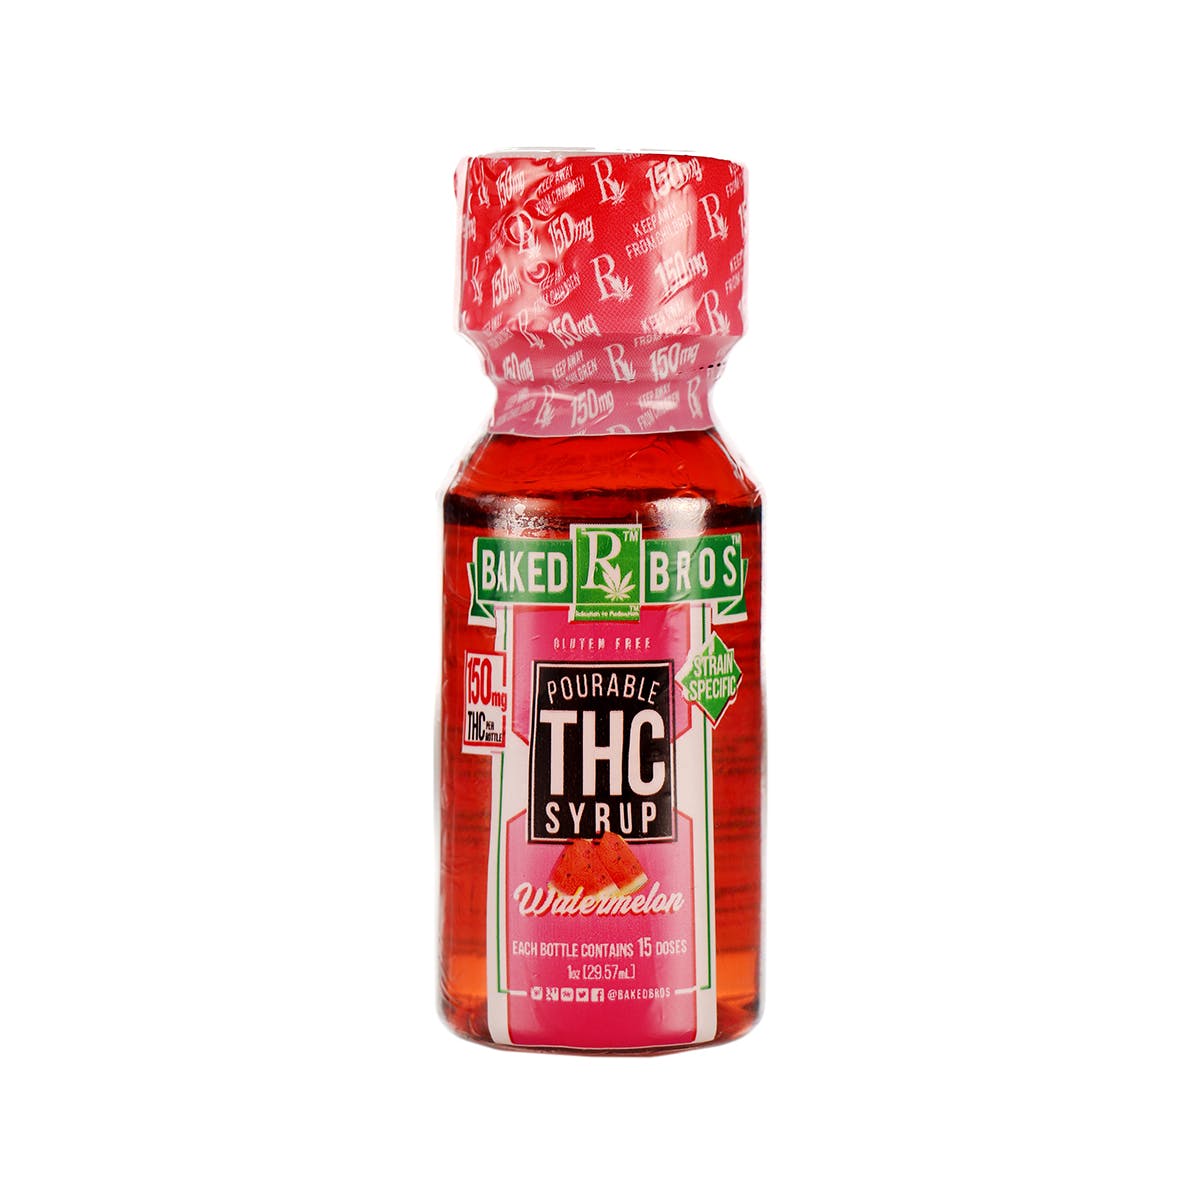 edible-baked-bros-thc-syrup-watermelon-150mg